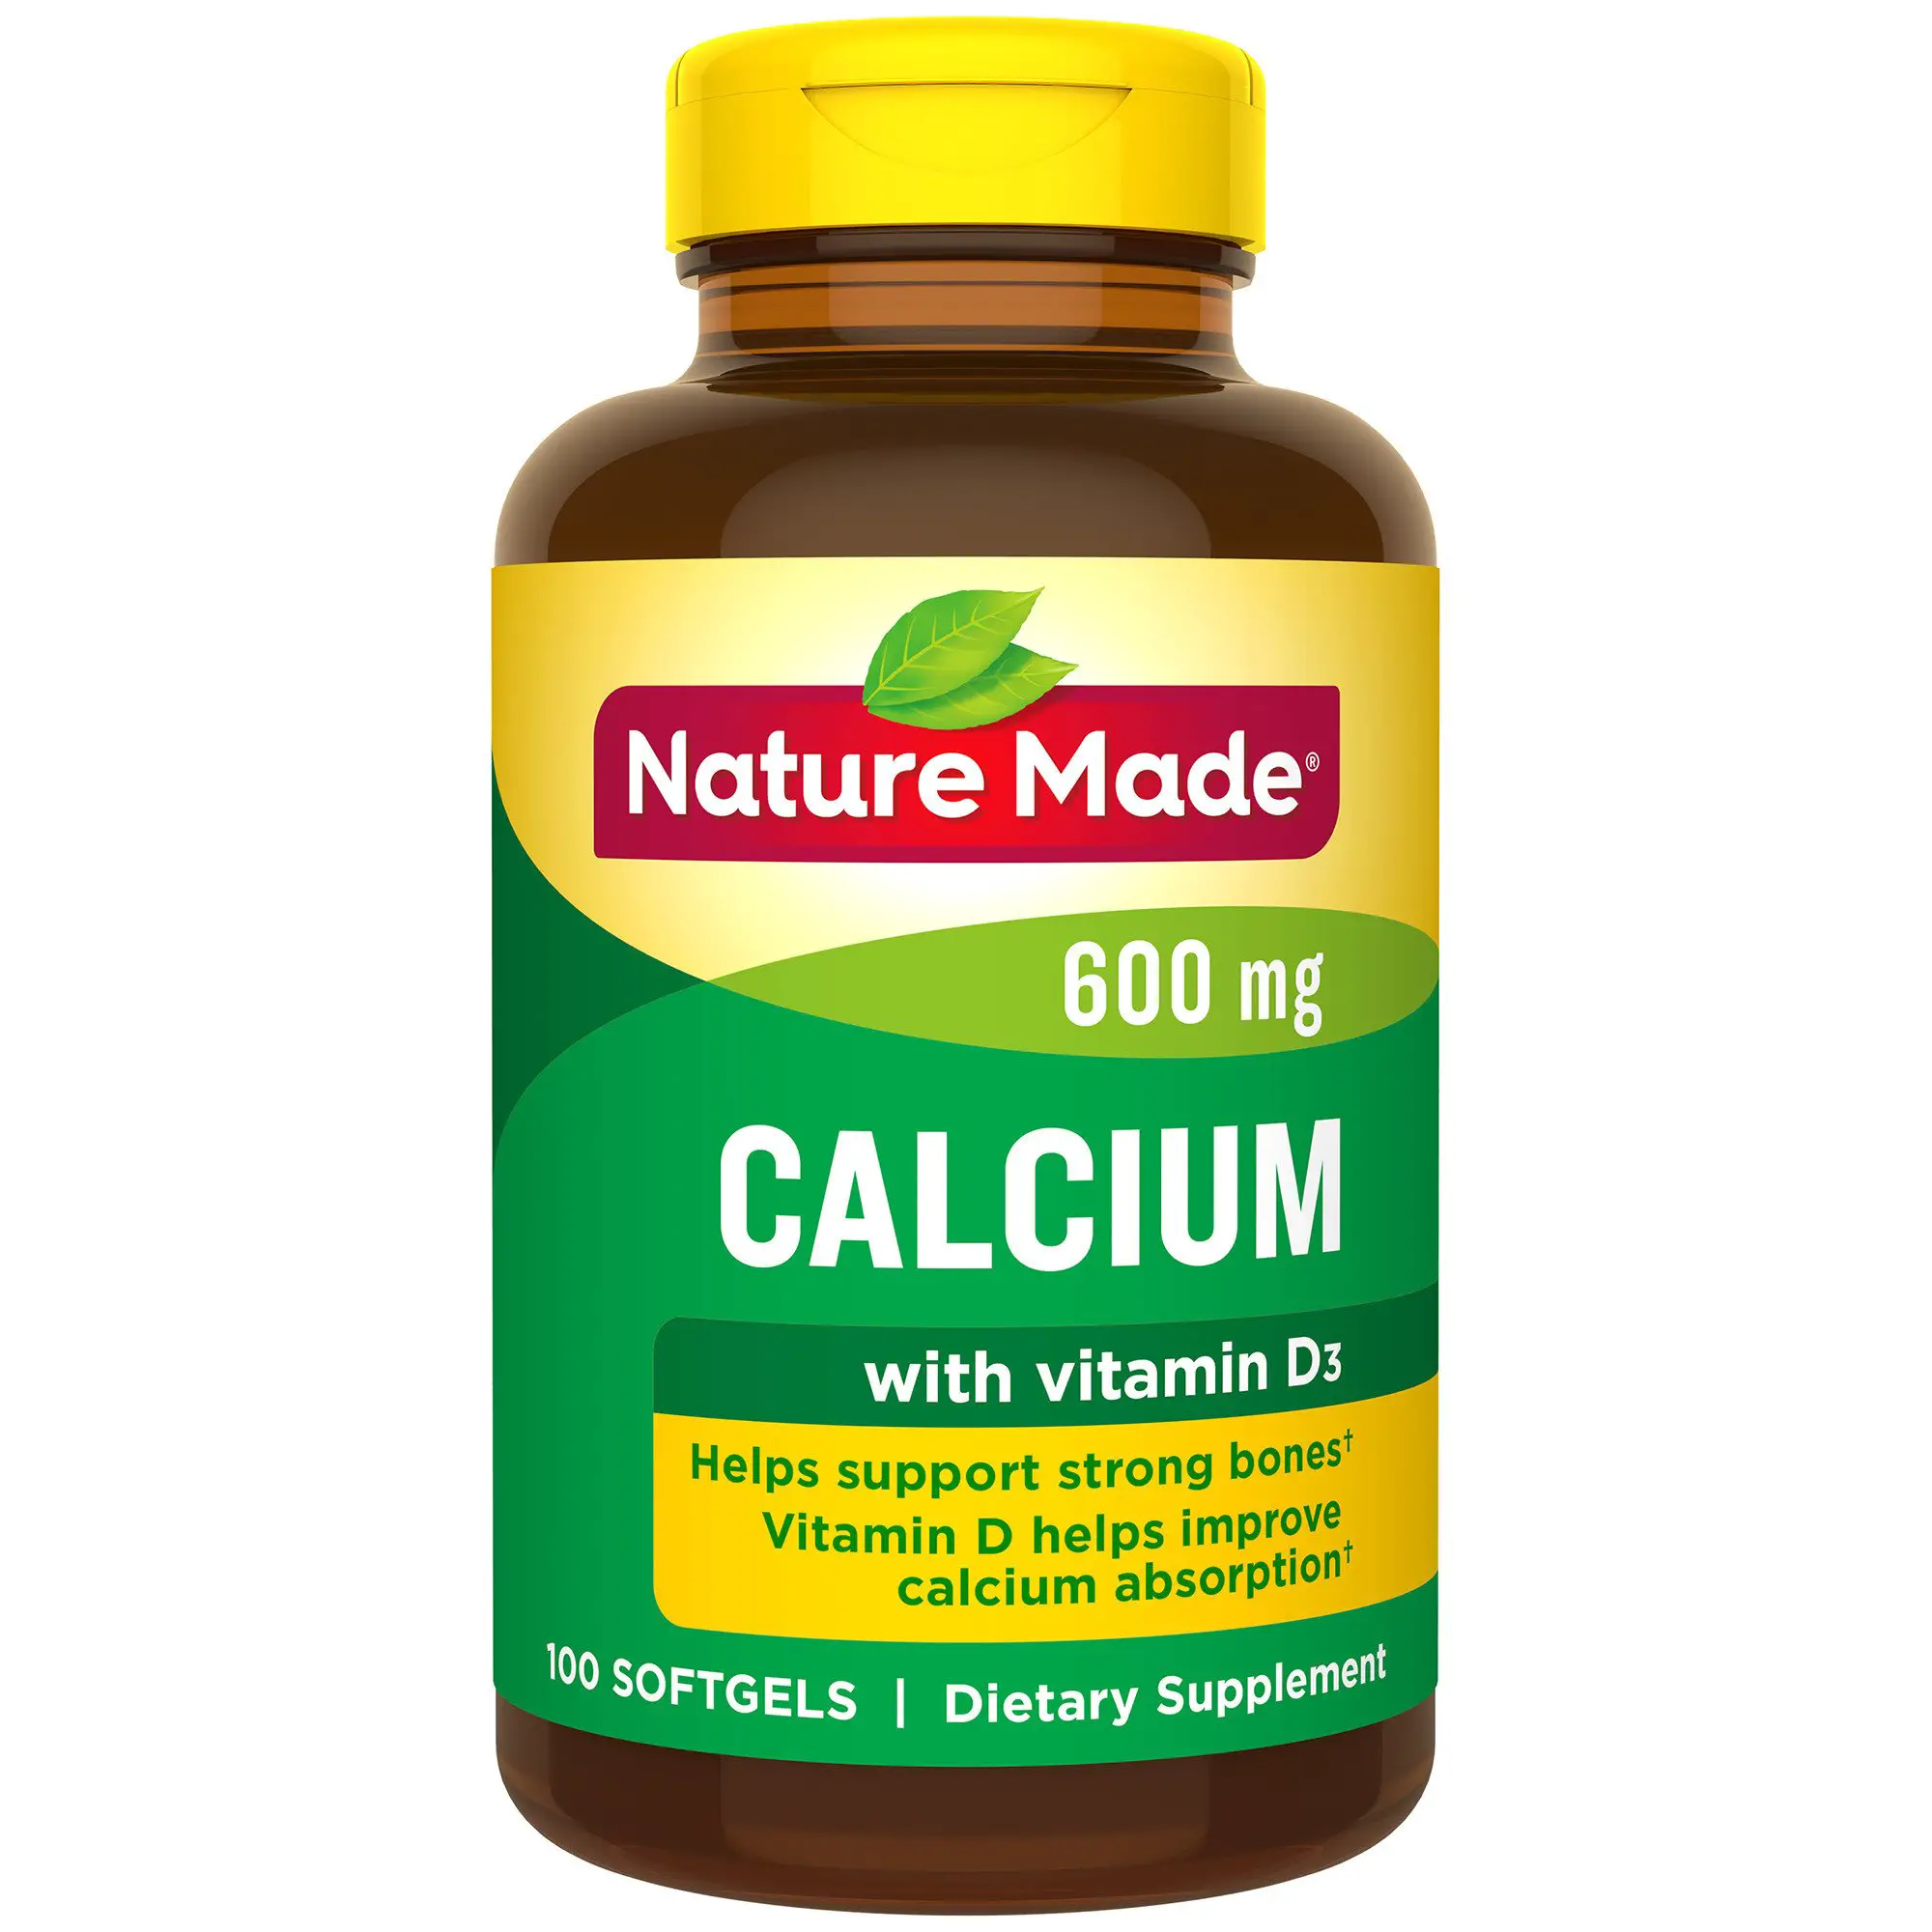 Nature Made Calcium 600 mg Softgels with Vitamin D, 100 ...